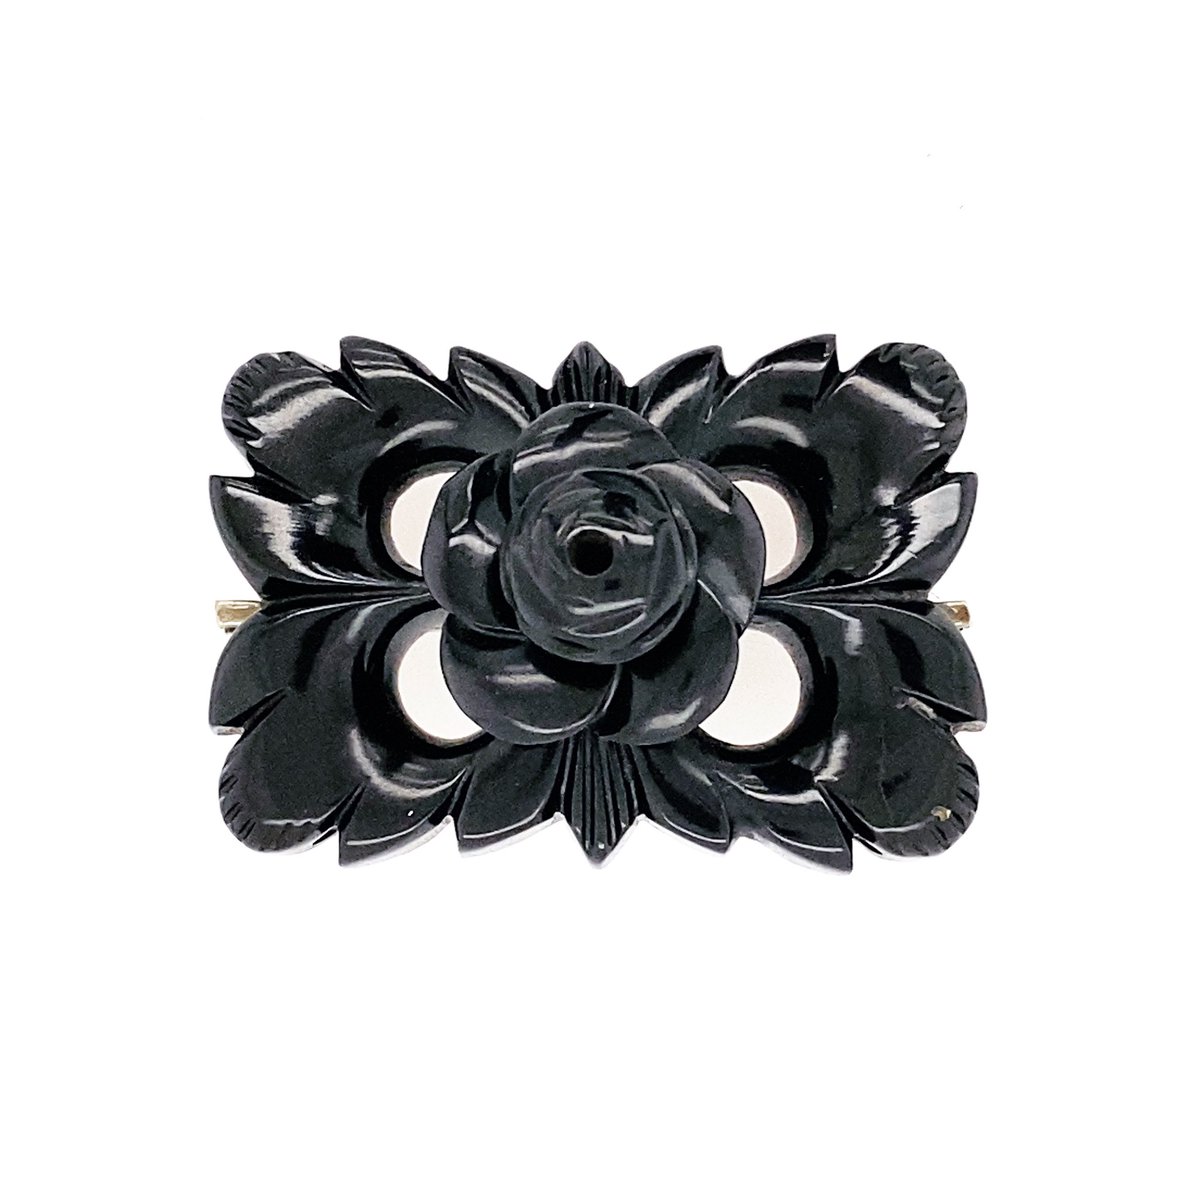 This beautiful #WhitbyJet brooch oozes with the love, regard and fidelity that it’s delicately carved rose centre was designed to represent.

Visit @ArtOfMourning for more explorative posts about #Floriography (language of flowers) in collaboration with the #MuseumofWhitbyJet 🖤